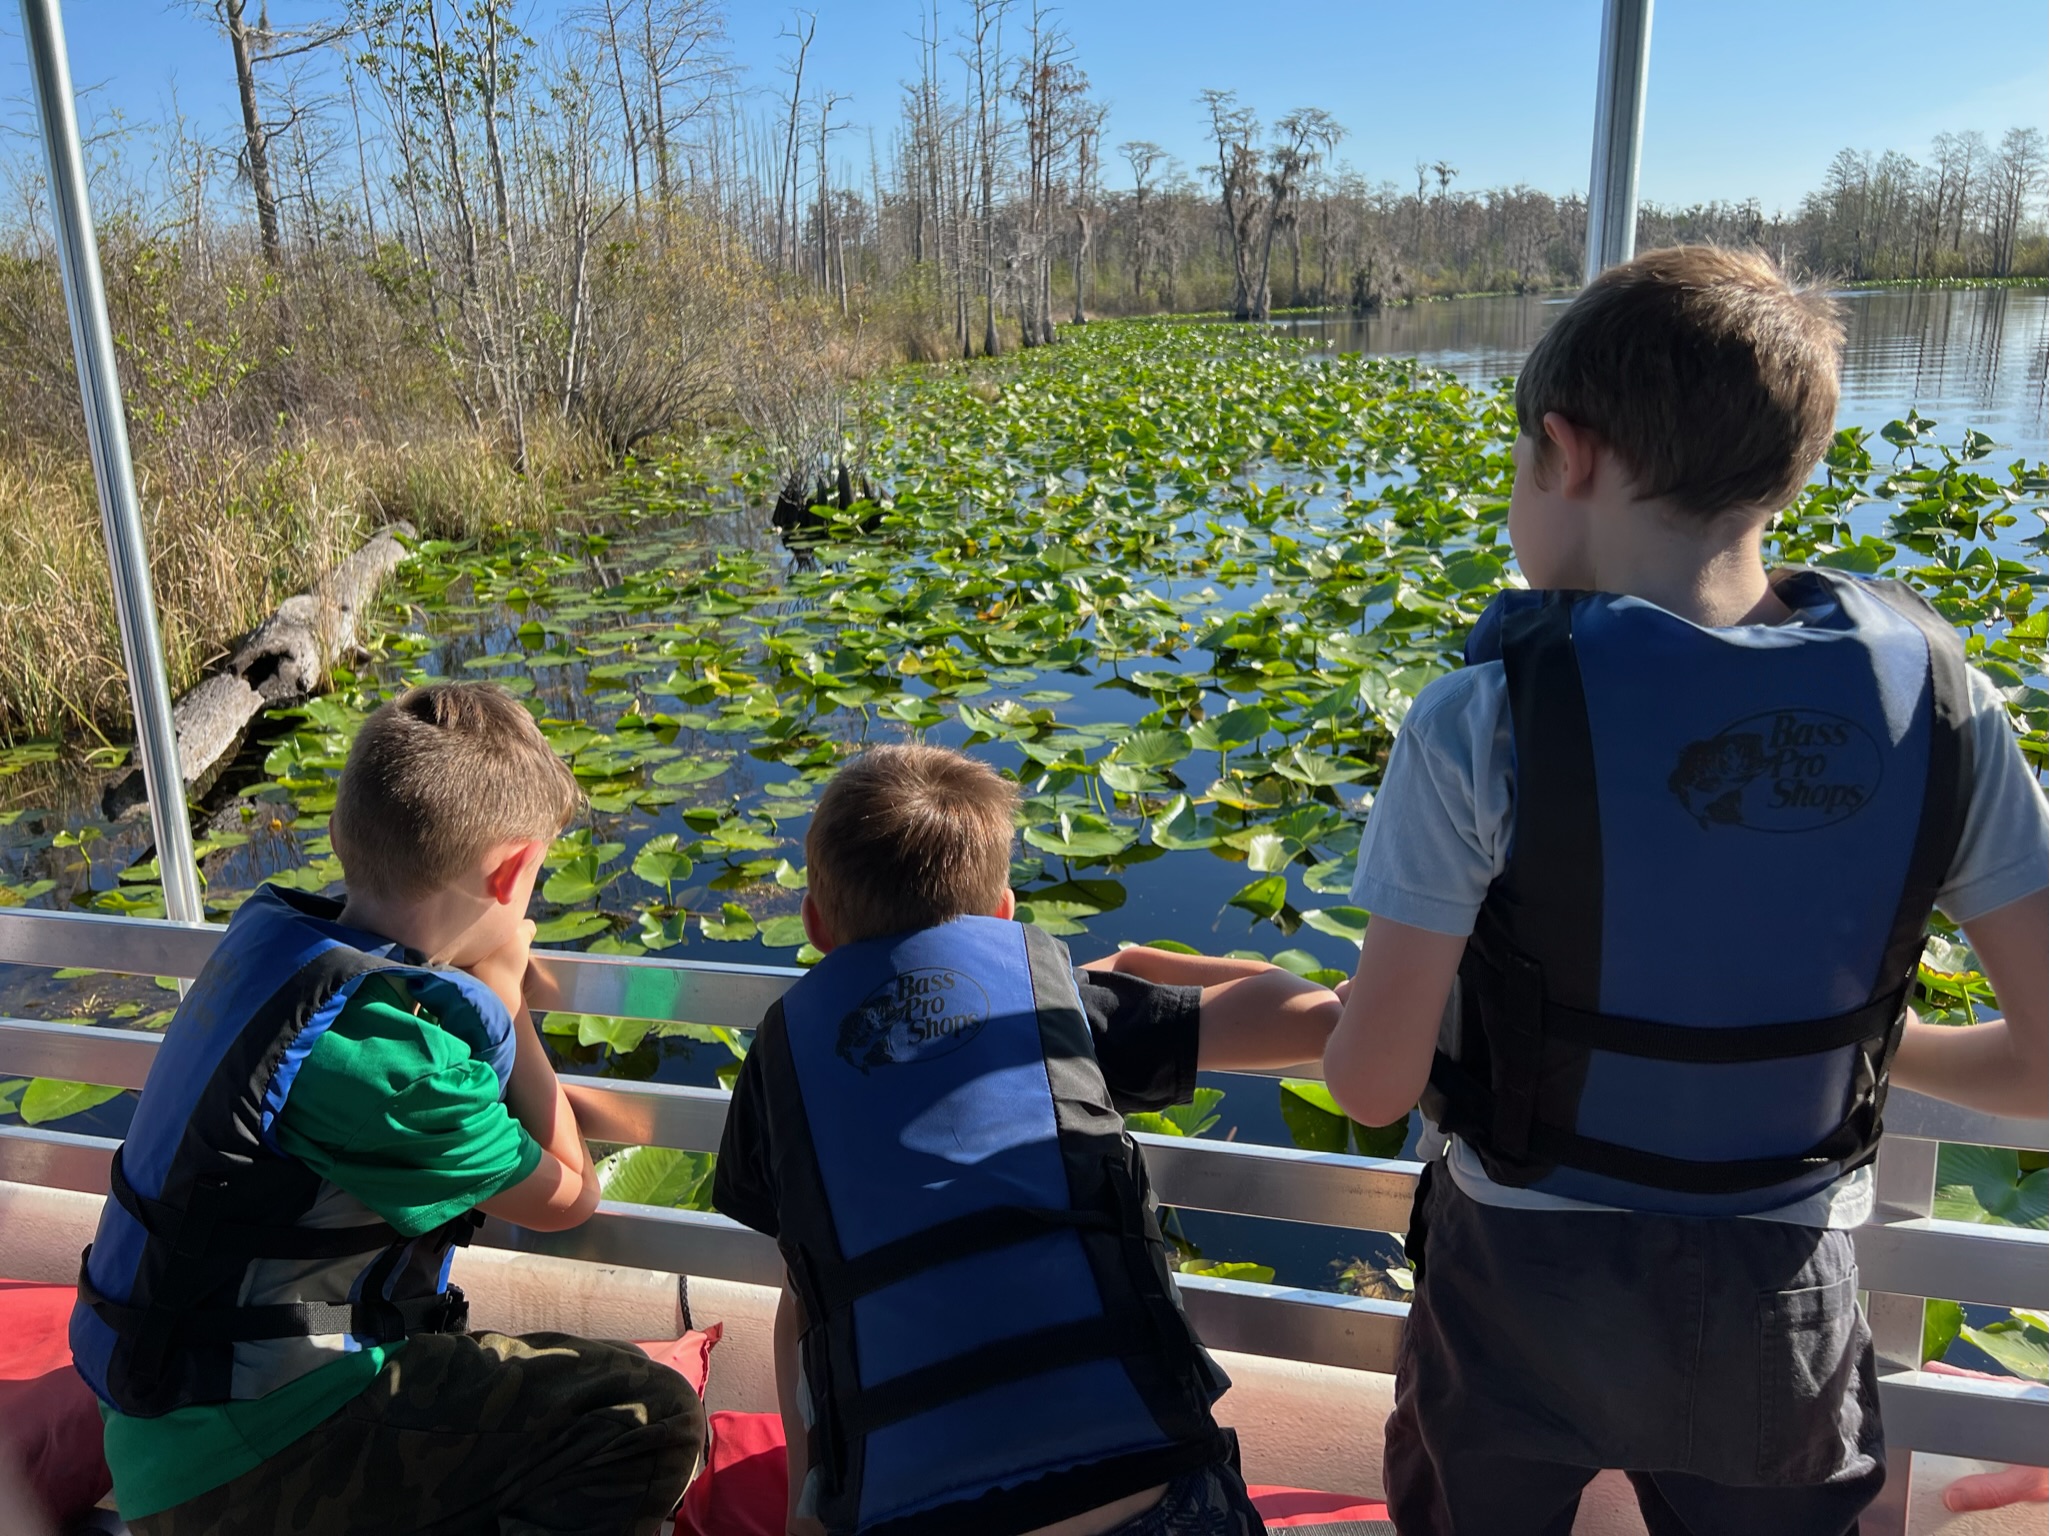 We took three 1st graders to the Okefenokee Swamp. This is them loving the boat tour put on by the Refuge Naturalist.